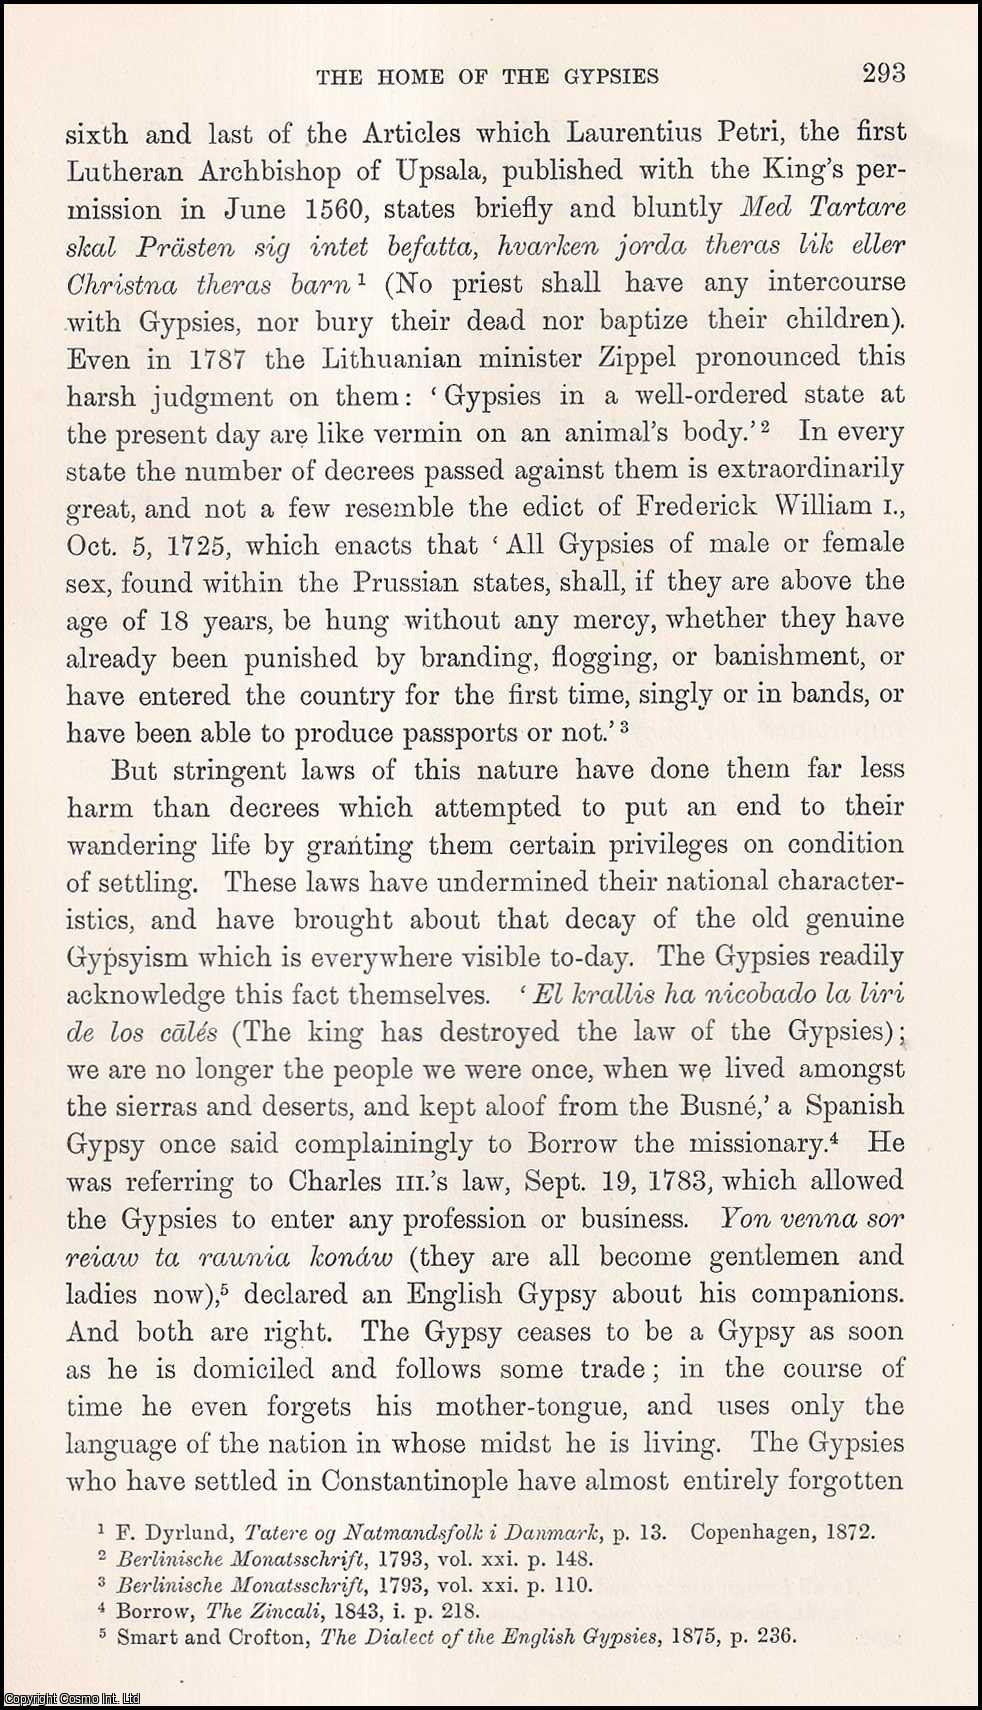 Late Geheimrat Professor R. Pischel - The Home of the Gypsies, Europe. An uncommon original article from the Journal of the Gypsy Lore Society, 1909.